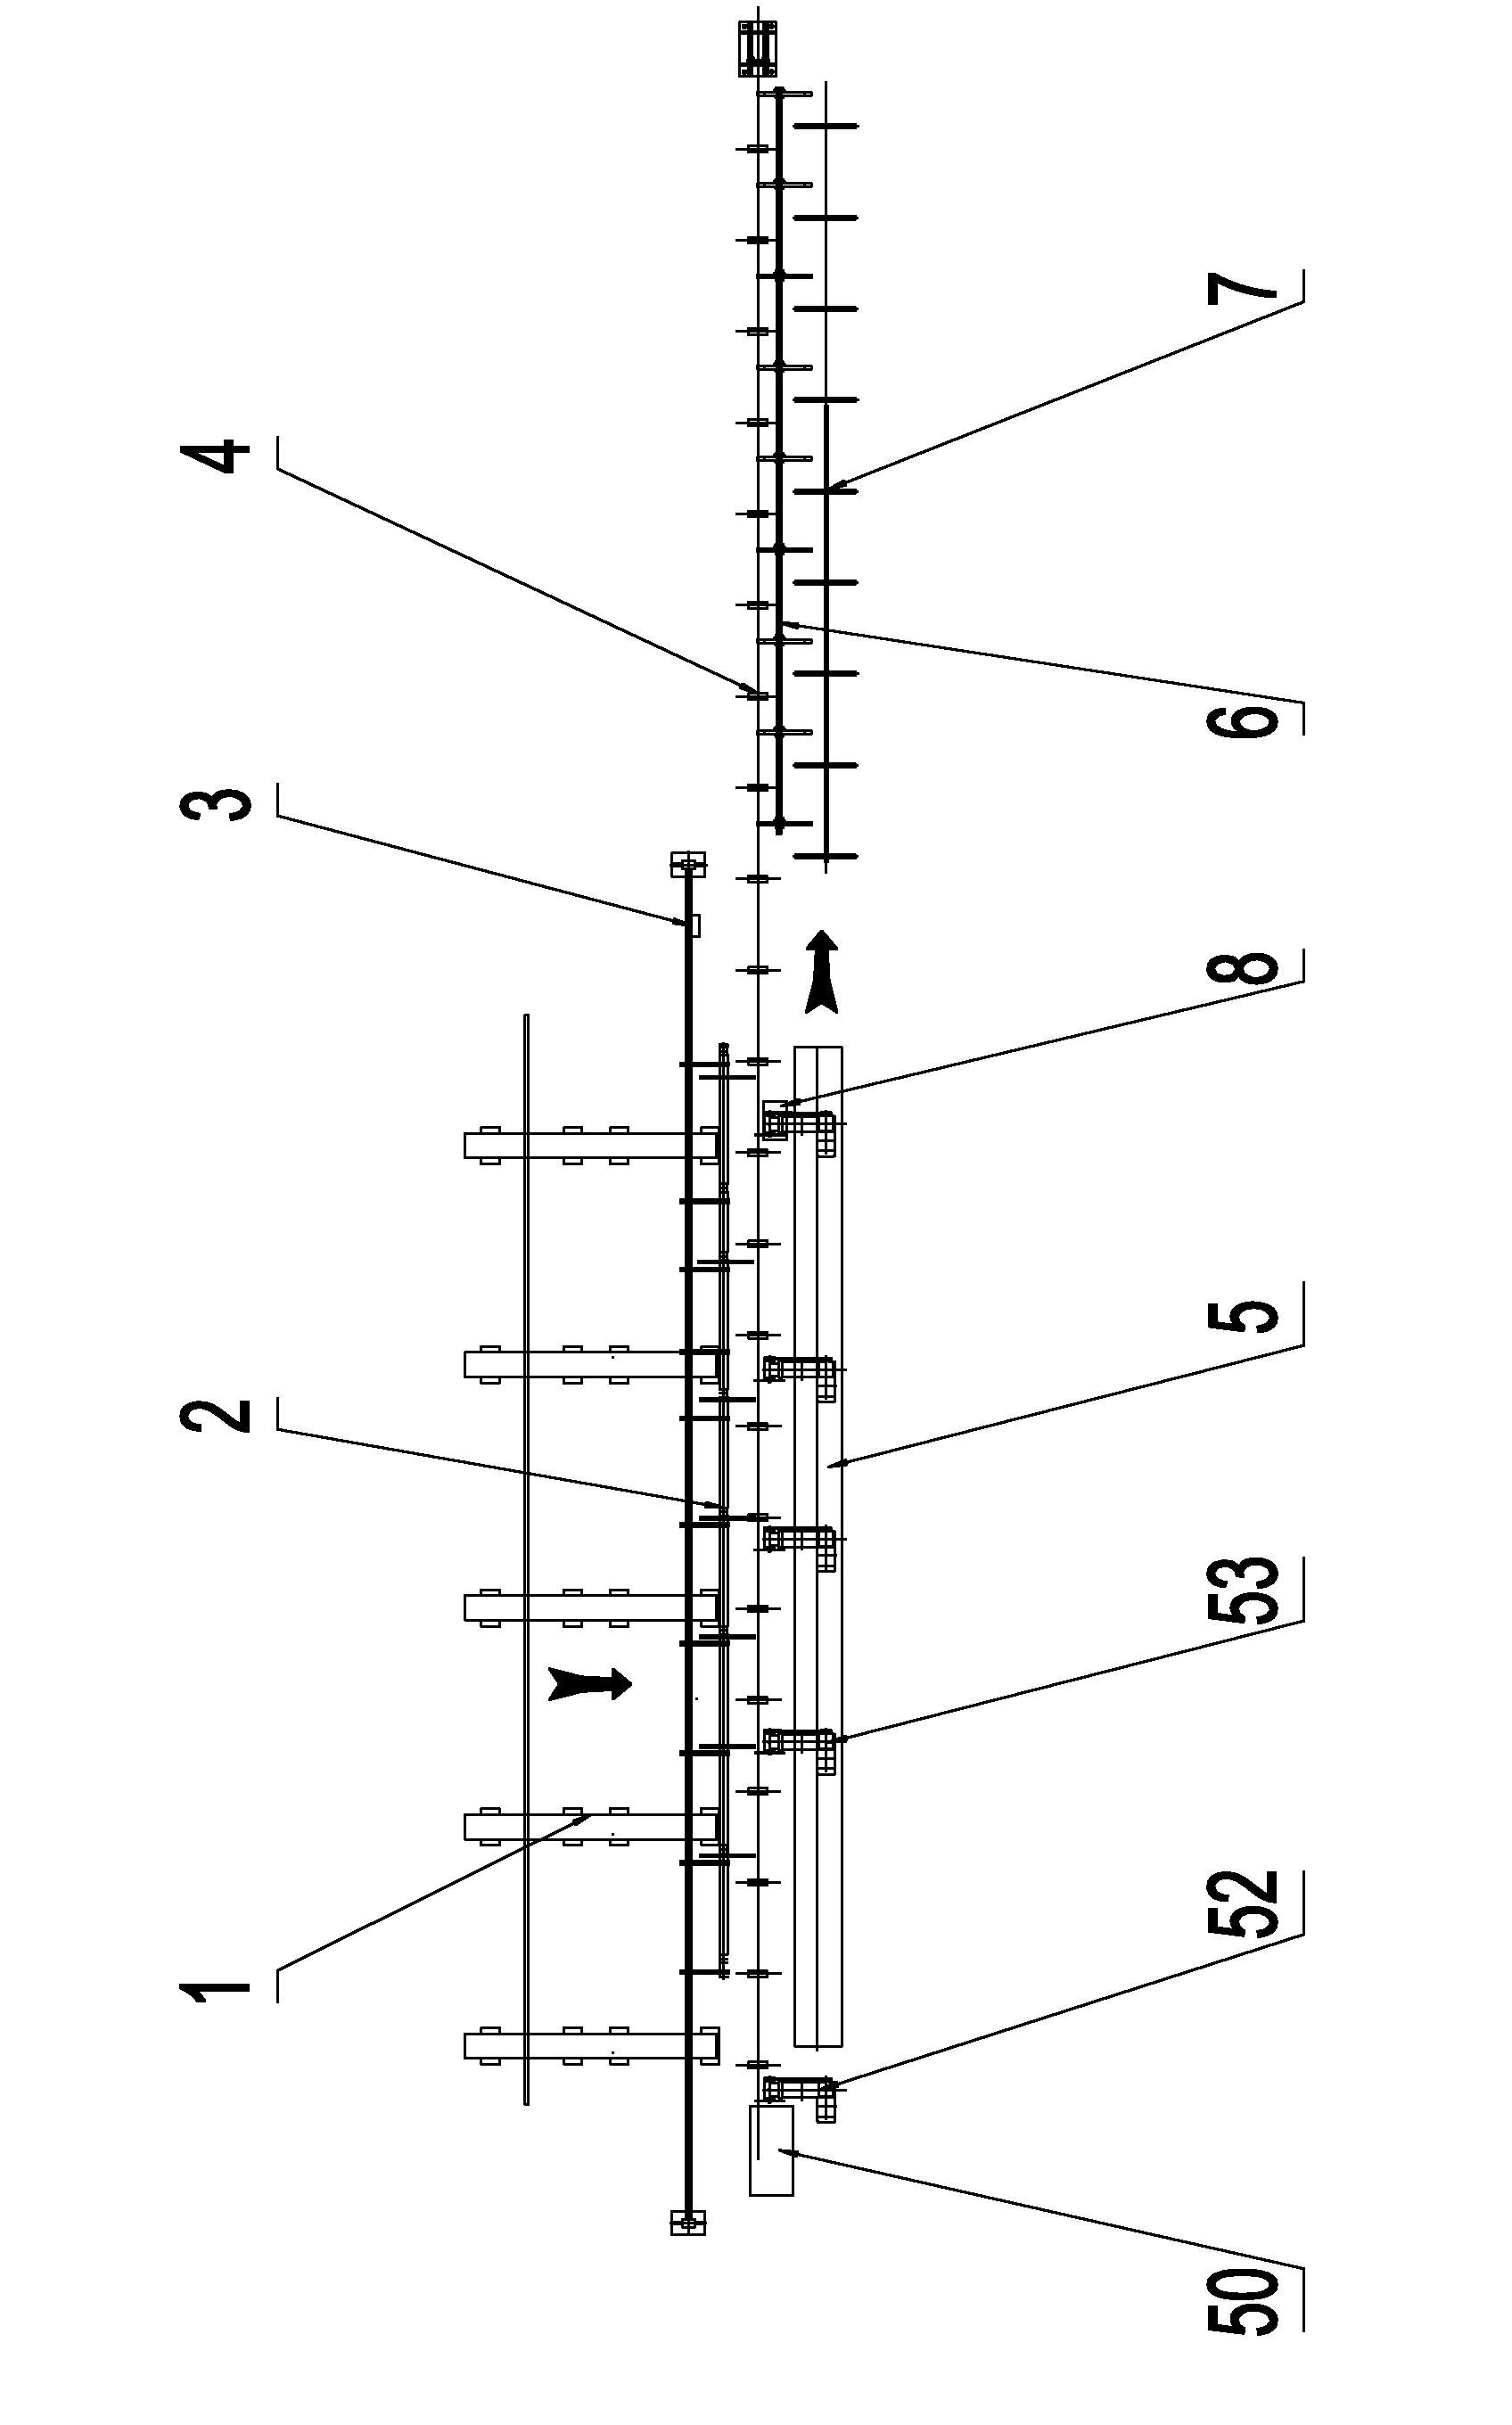 Fixed-length segmenting and sawing production line